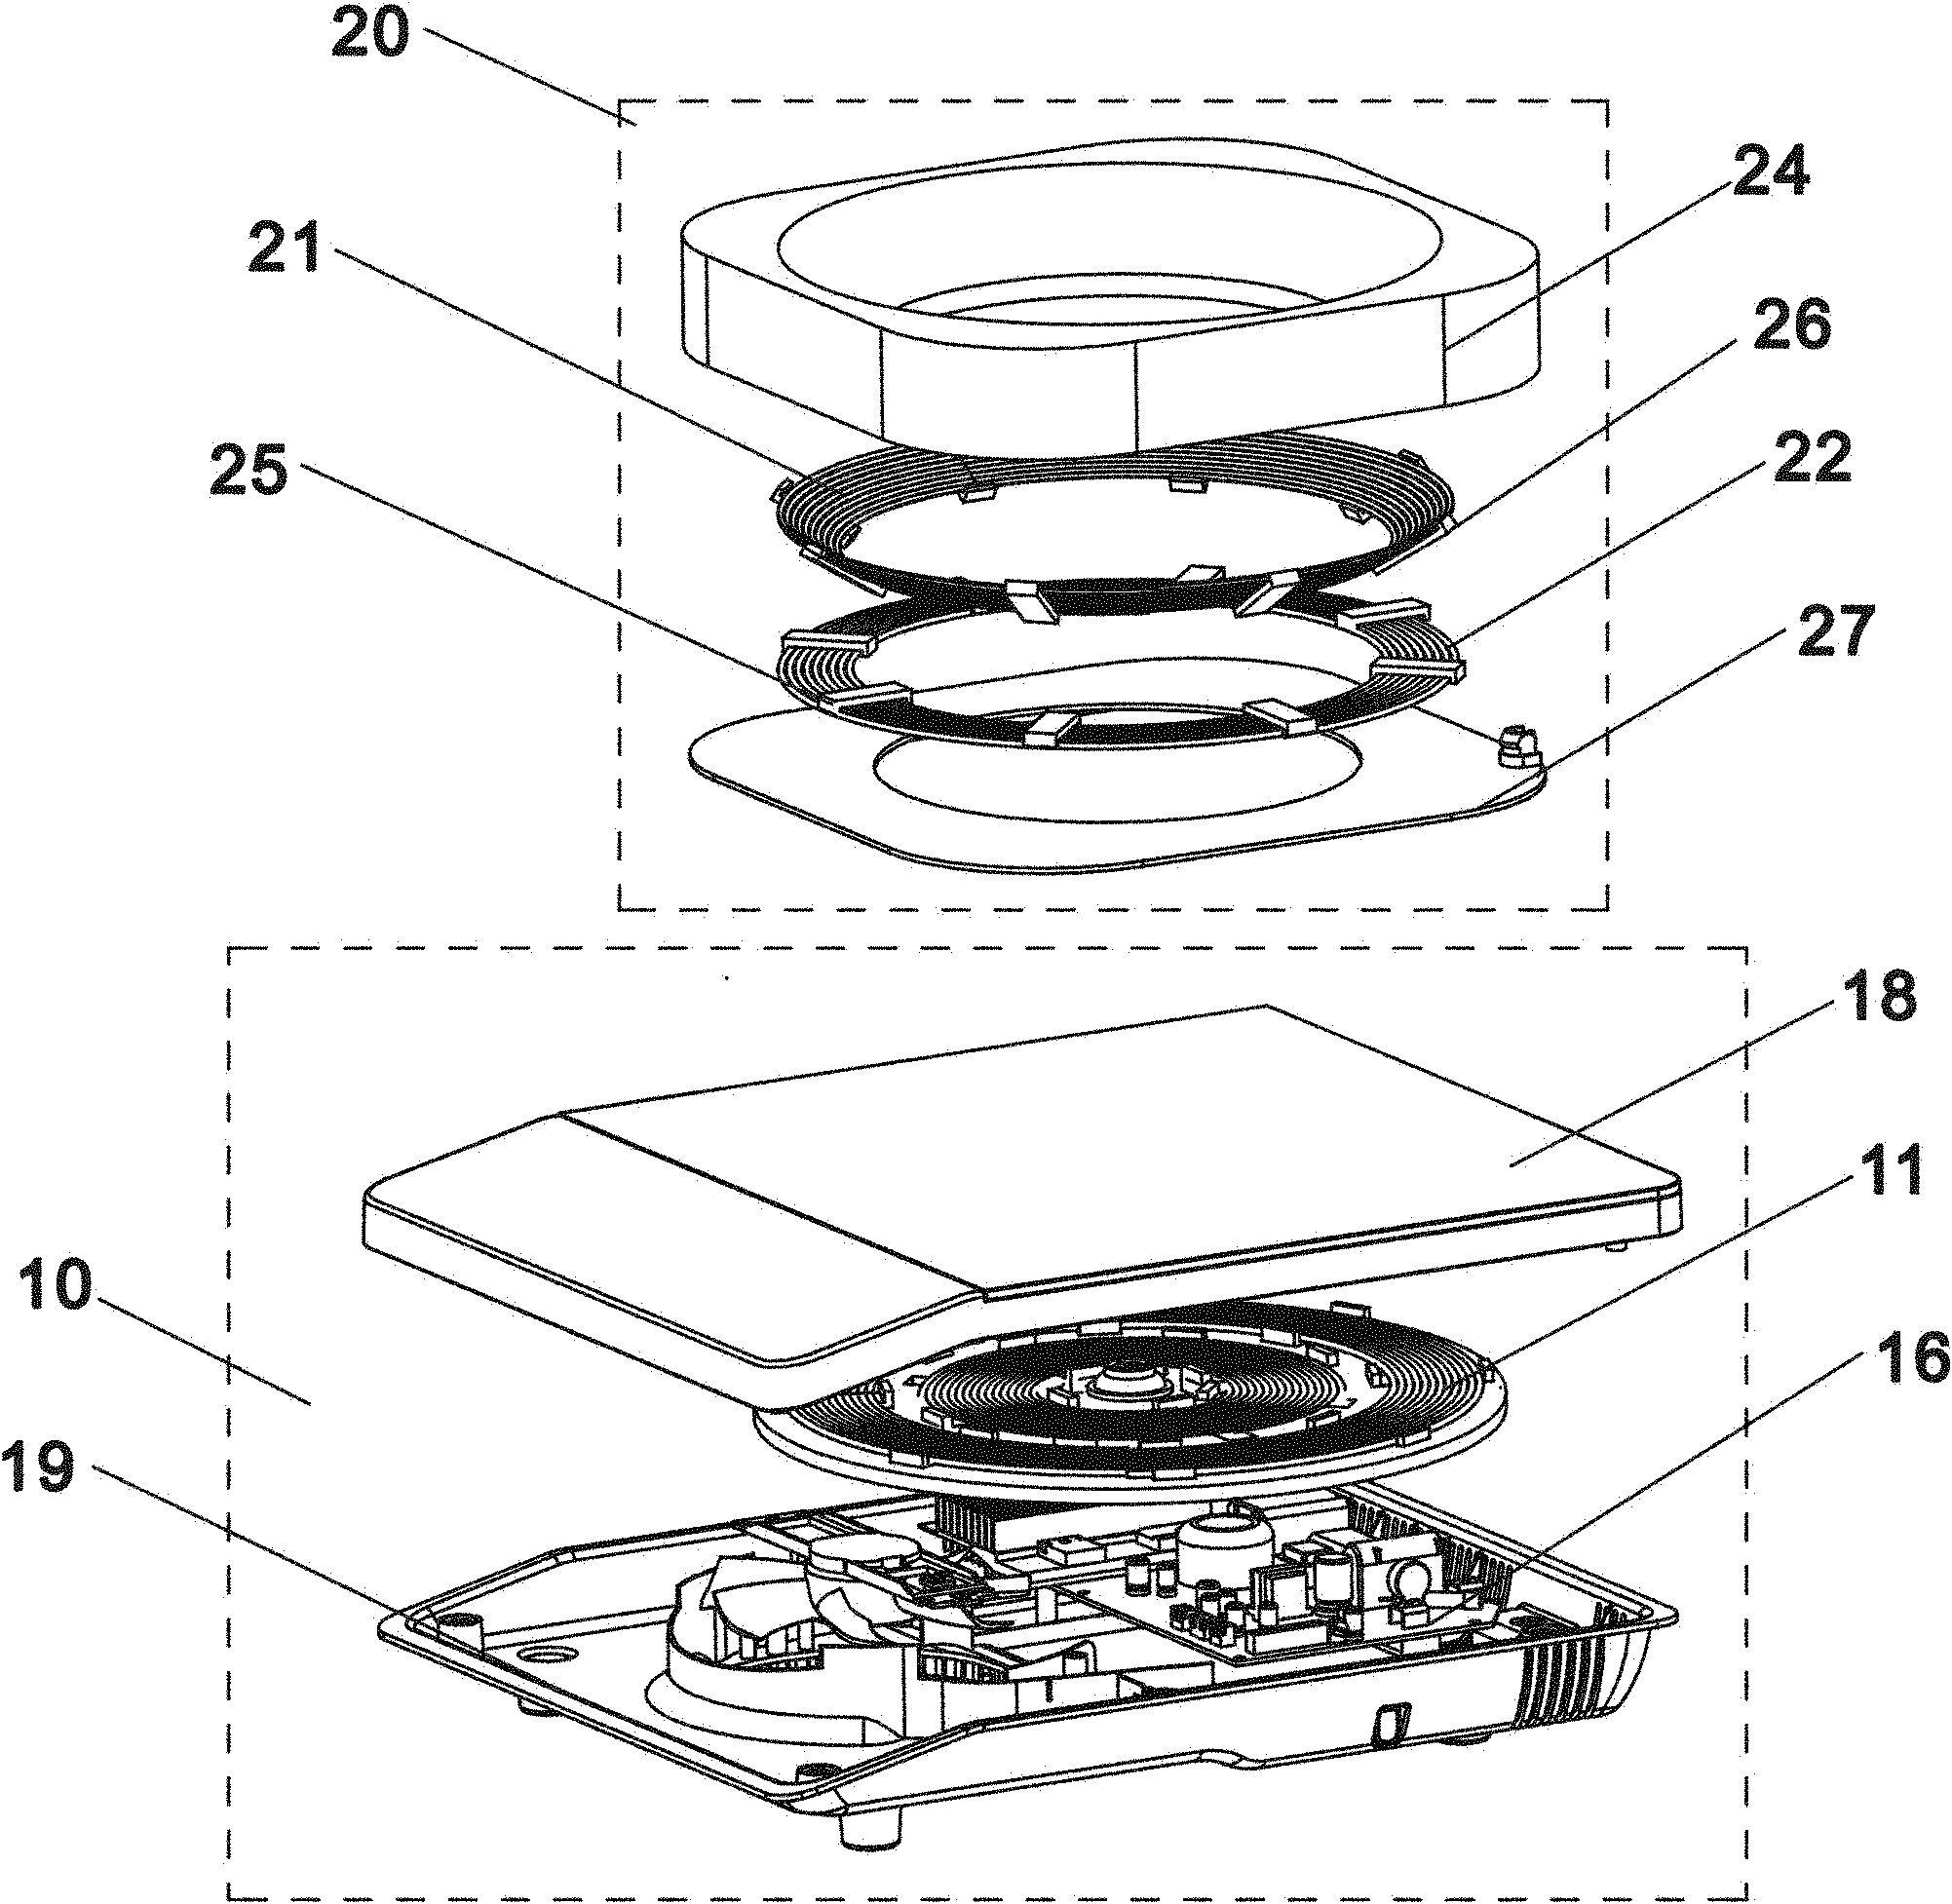 Electromagnetic cooking appliance capable of three-dimensionally heating cooking container